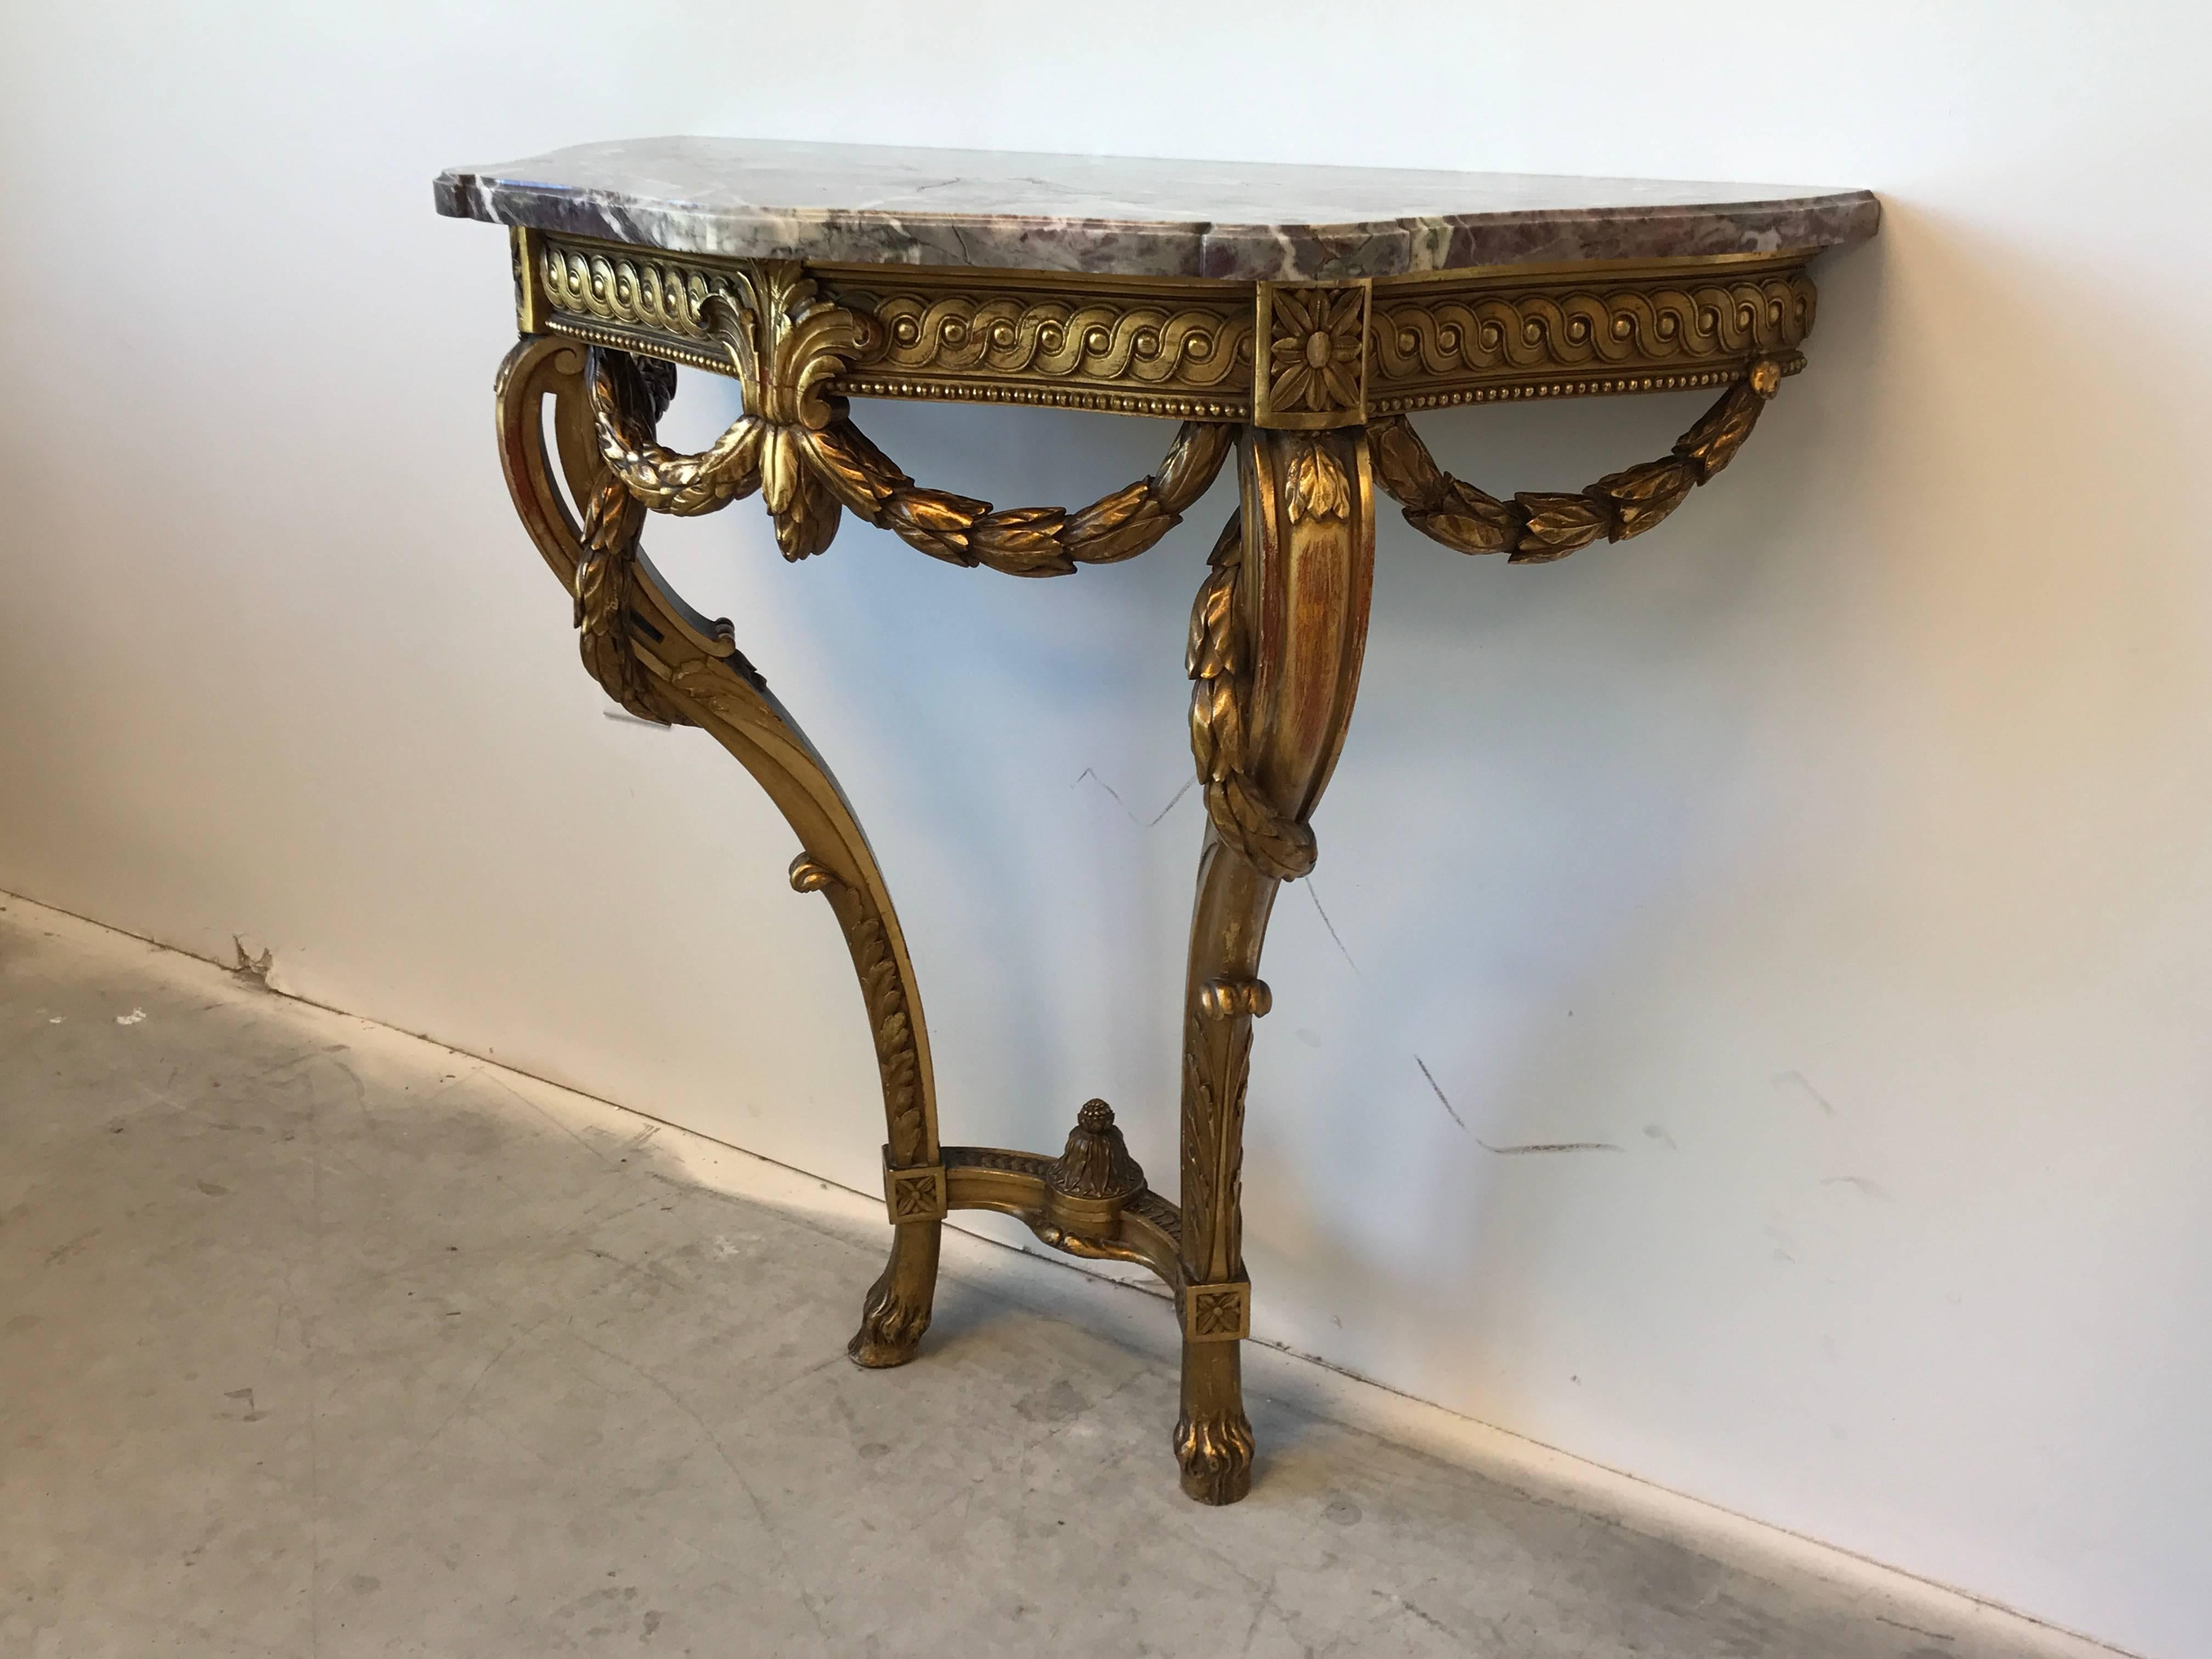 Offered is a stunning, 19th century, Louis XVI style French giltwood demilune console table with marble top. Mounts to wall, marble is removable.